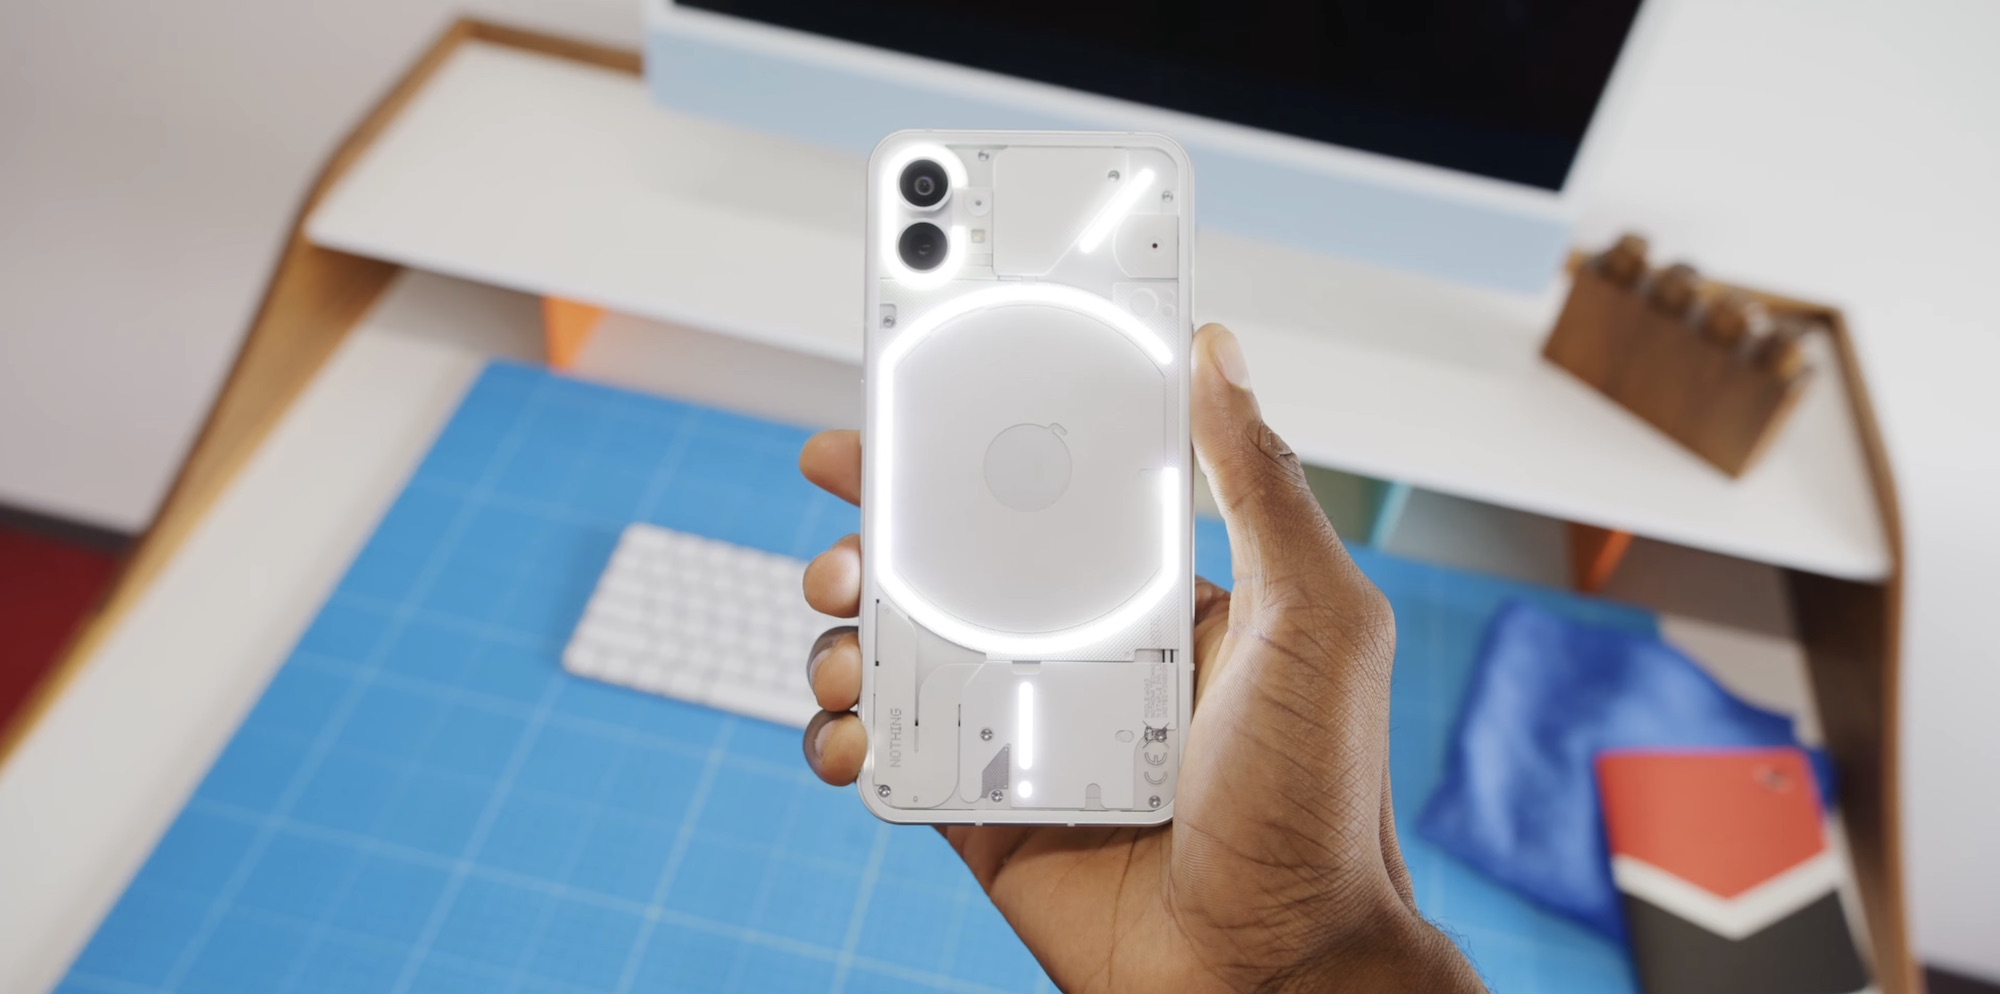 The iPhone loses the spotlight to its rivals in the 2022 MKBHD Smartphone Awards.